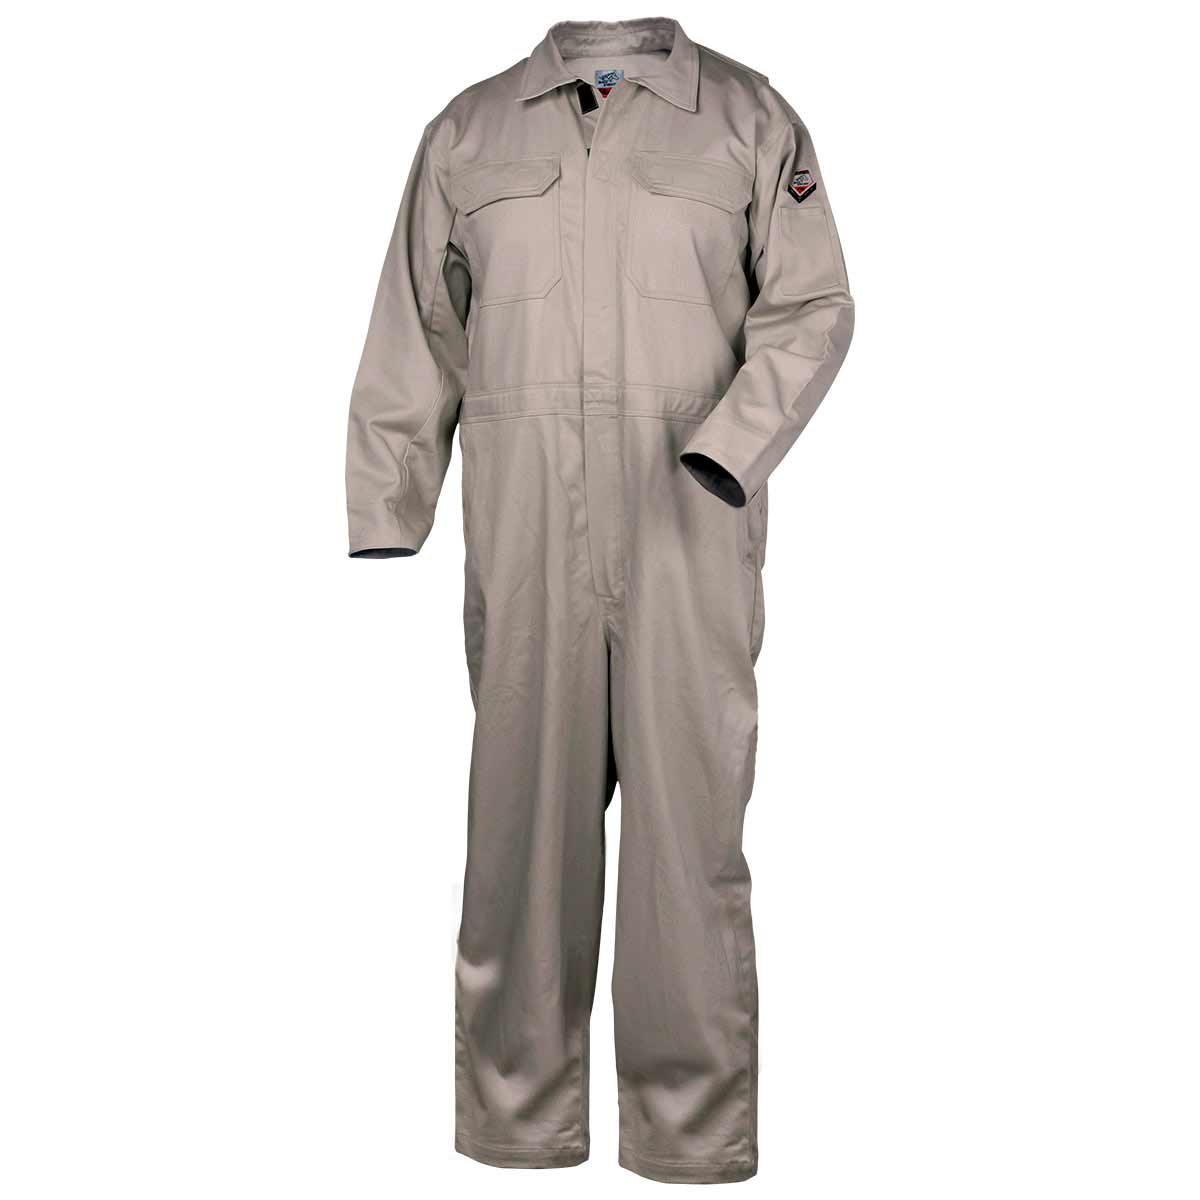 9 OZ FLAME-RESISTANT COTTON COVERALLS (STONE). Pack 1. 3X Large. CF2215-ST-3XL